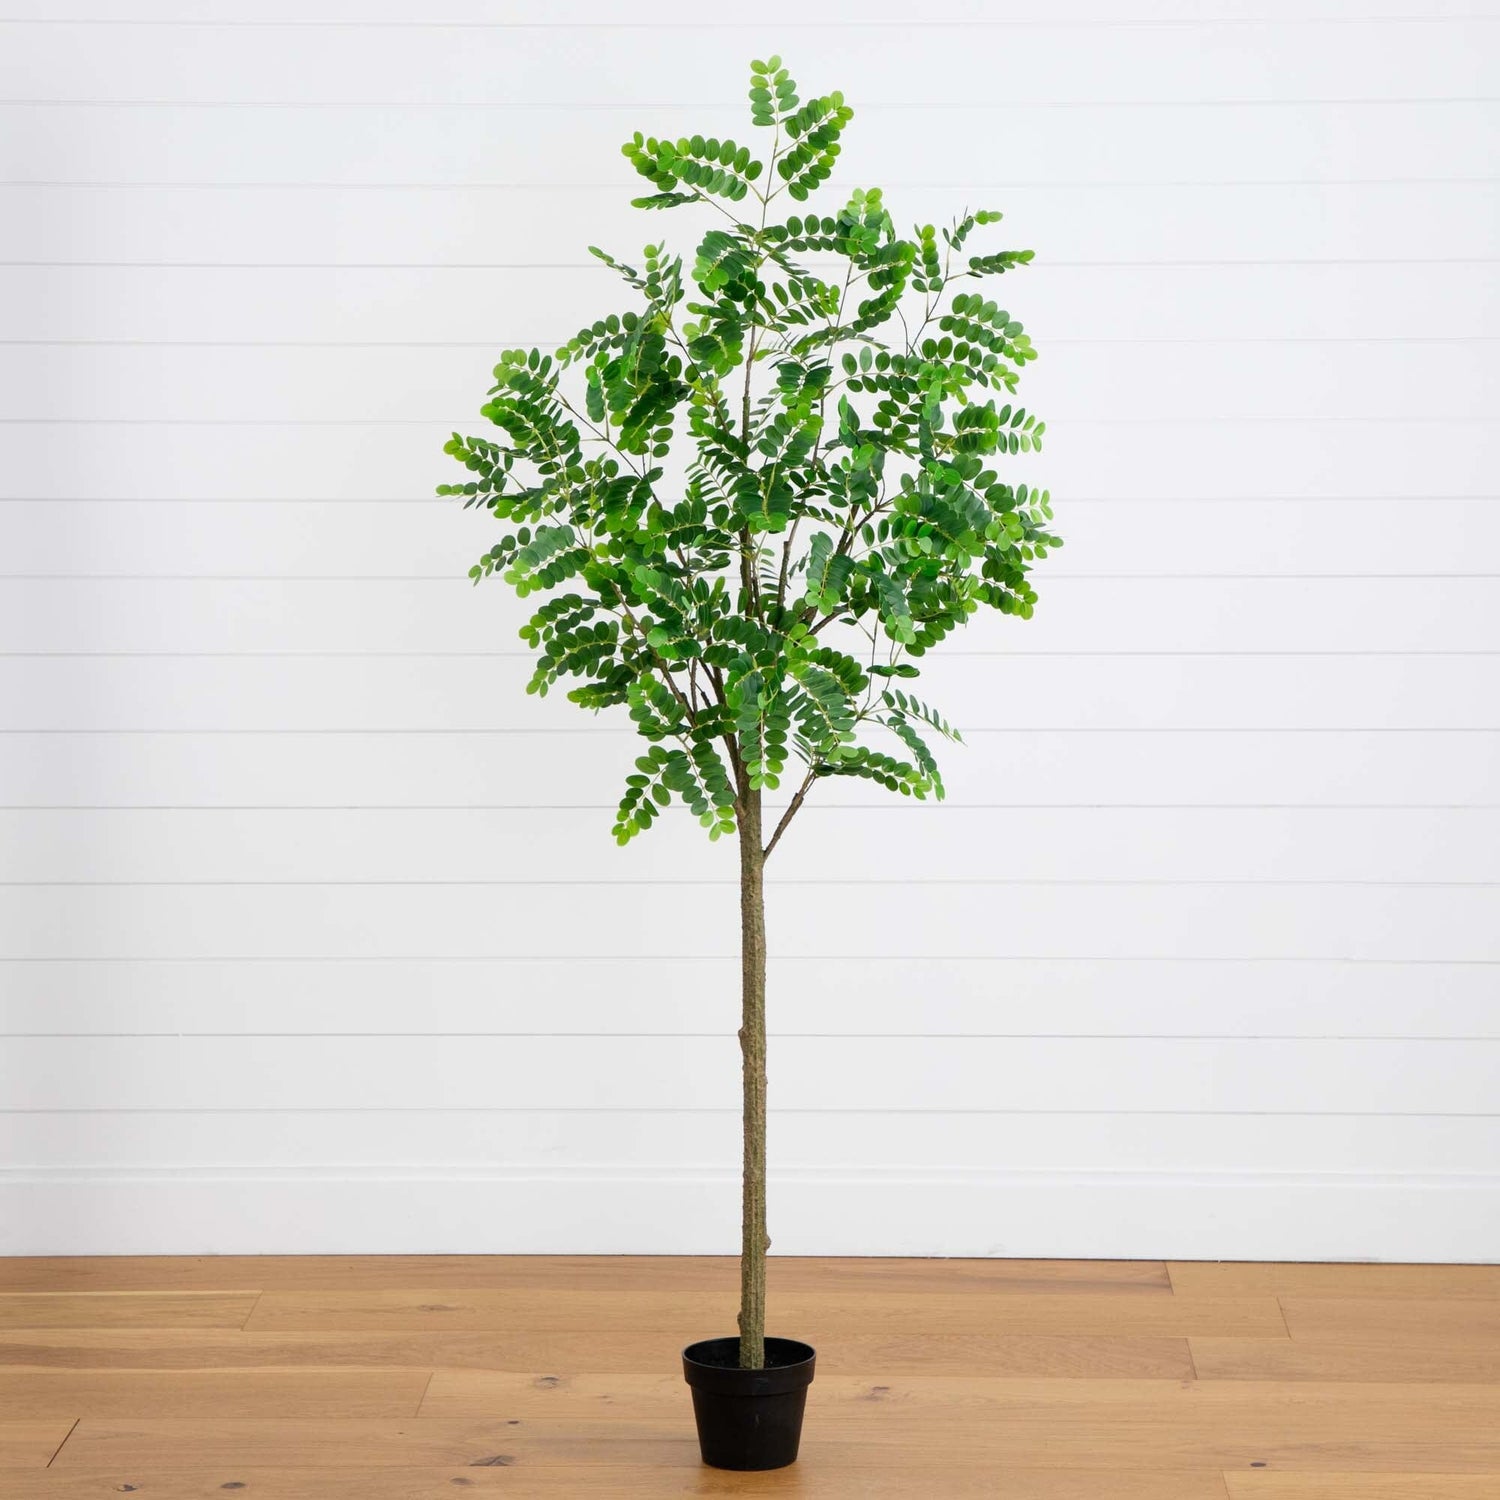 6’ Artificial Greco Citrus Tree with Real Touch Leaves